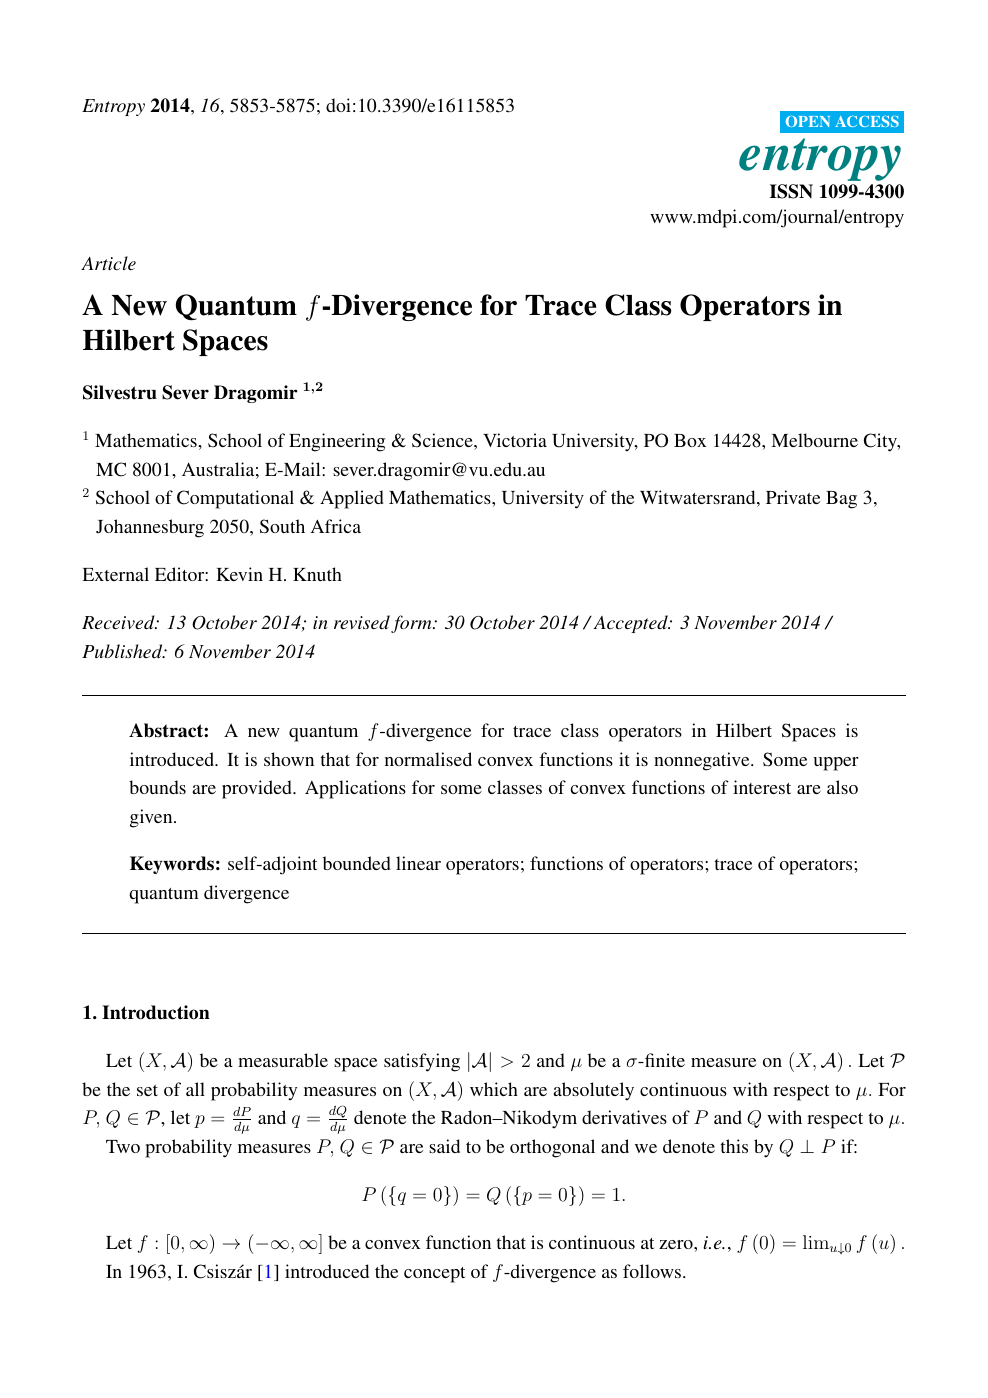 A New Quantum F Divergence For Trace Class Operators In Hilbert Spaces Topic Of Research Paper In Mathematics Download Scholarly Article Pdf And Read For Free On Cyberleninka Open Science Hub